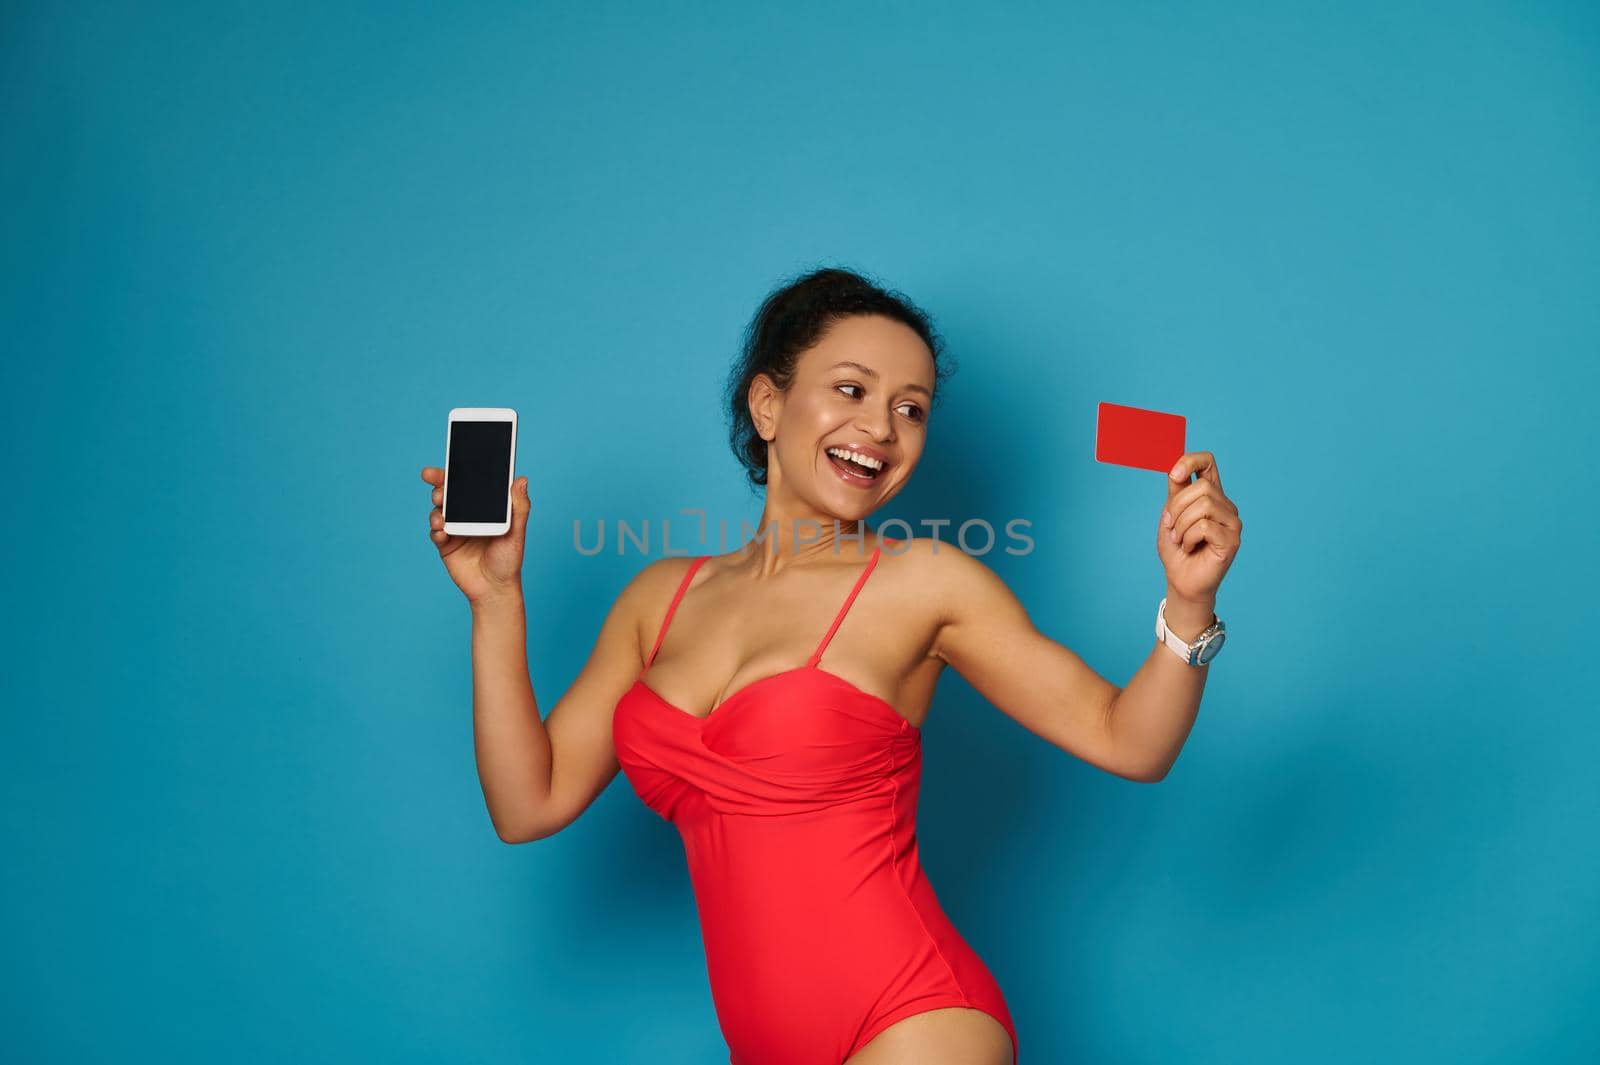 Attractive young woman in red swim suit holding a cell phone i her hand and looking at a red blank plastic card in her other hand by artgf